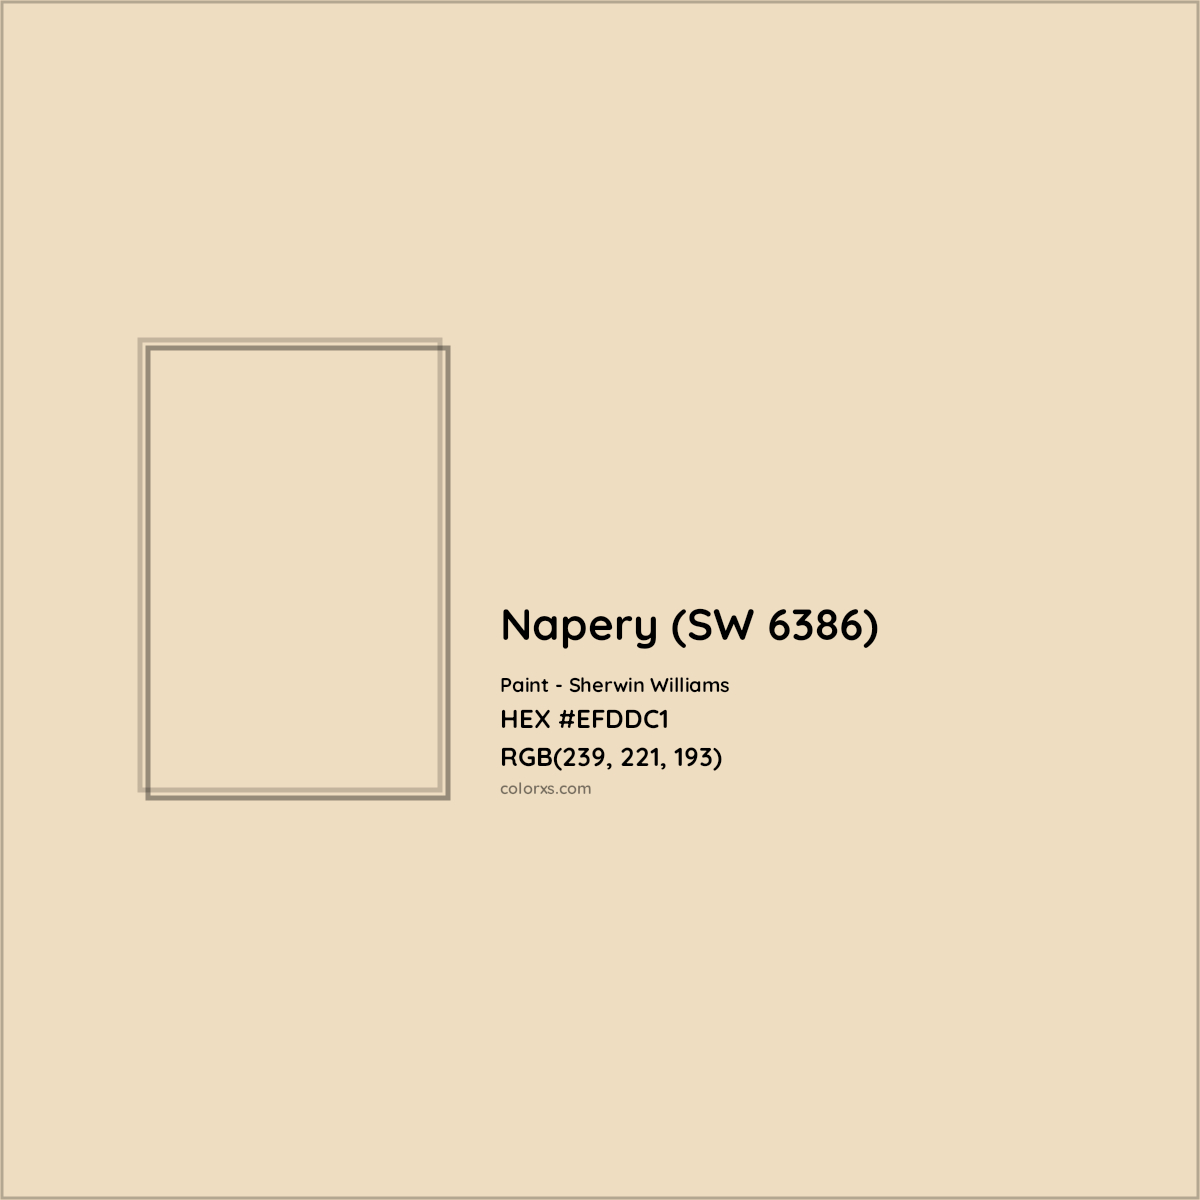 HEX #EFDDC1 Napery (SW 6386) Paint Sherwin Williams - Color Code